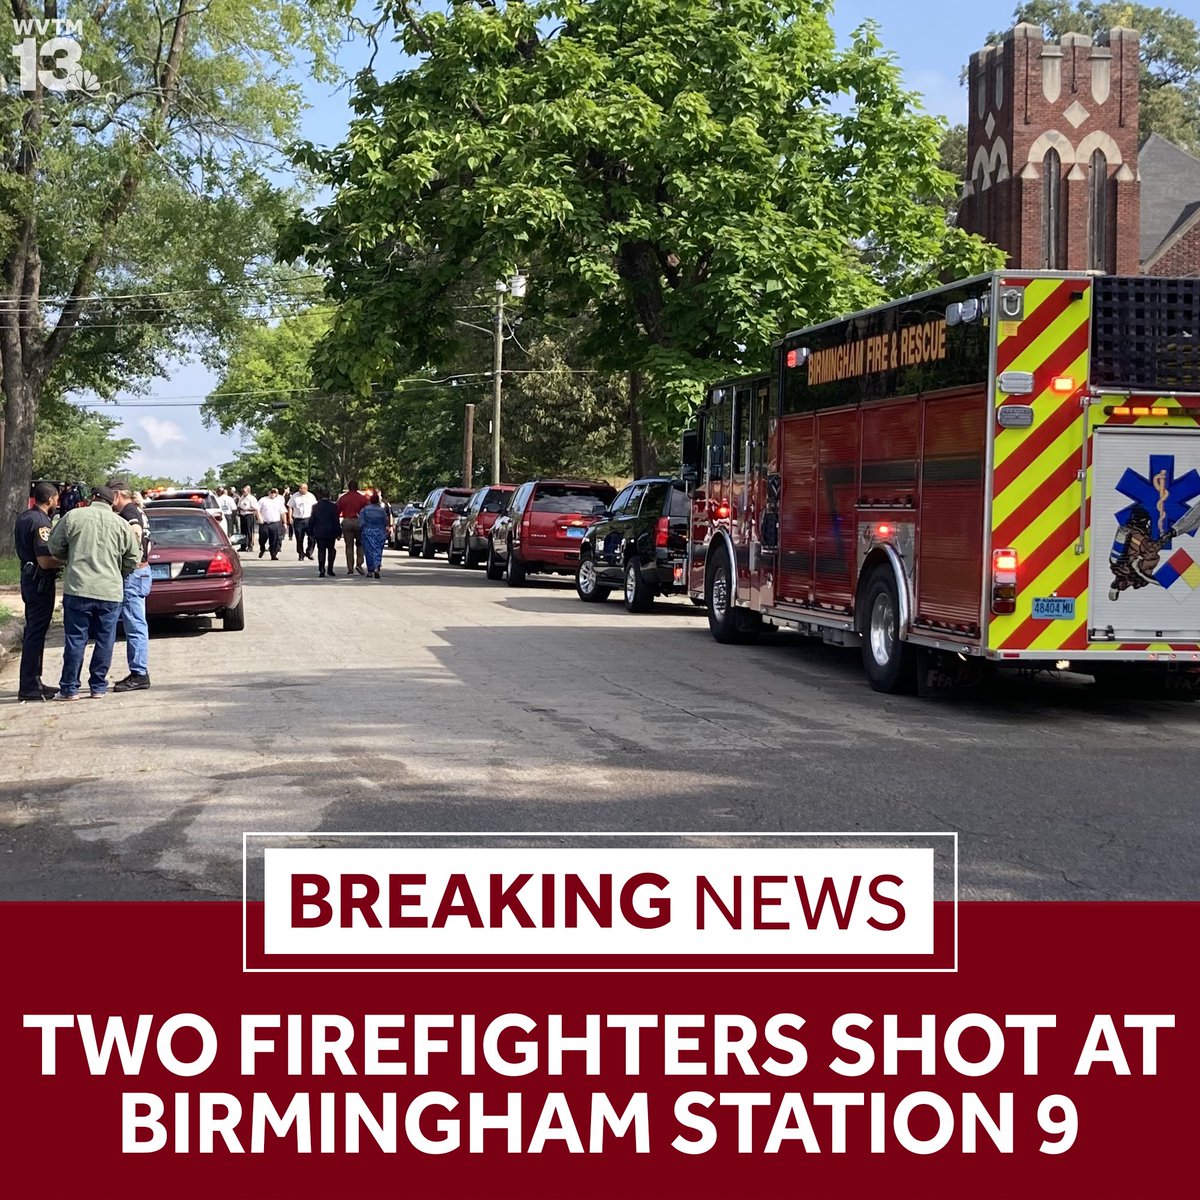 Two firefighters were doing routine morning maintenance at Station 9 in the Norwood area when police said they were shot. Police believe this incident was a targeted shooting